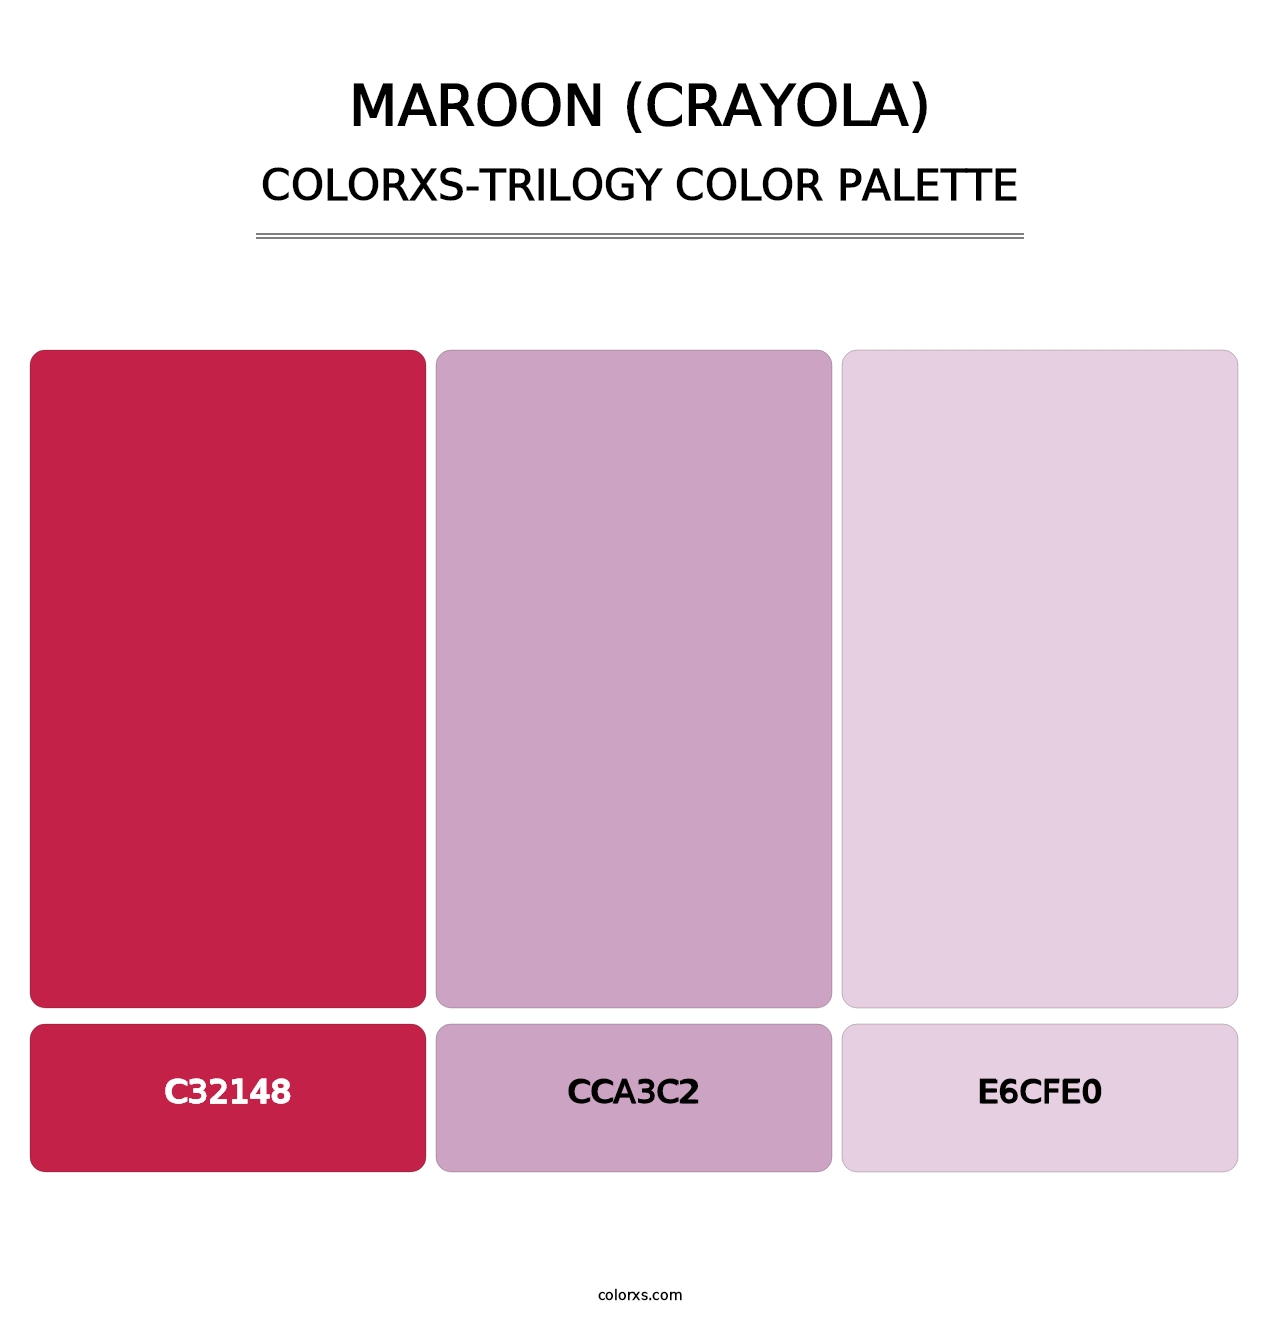 Maroon (Crayola) - Colorxs Trilogy Palette